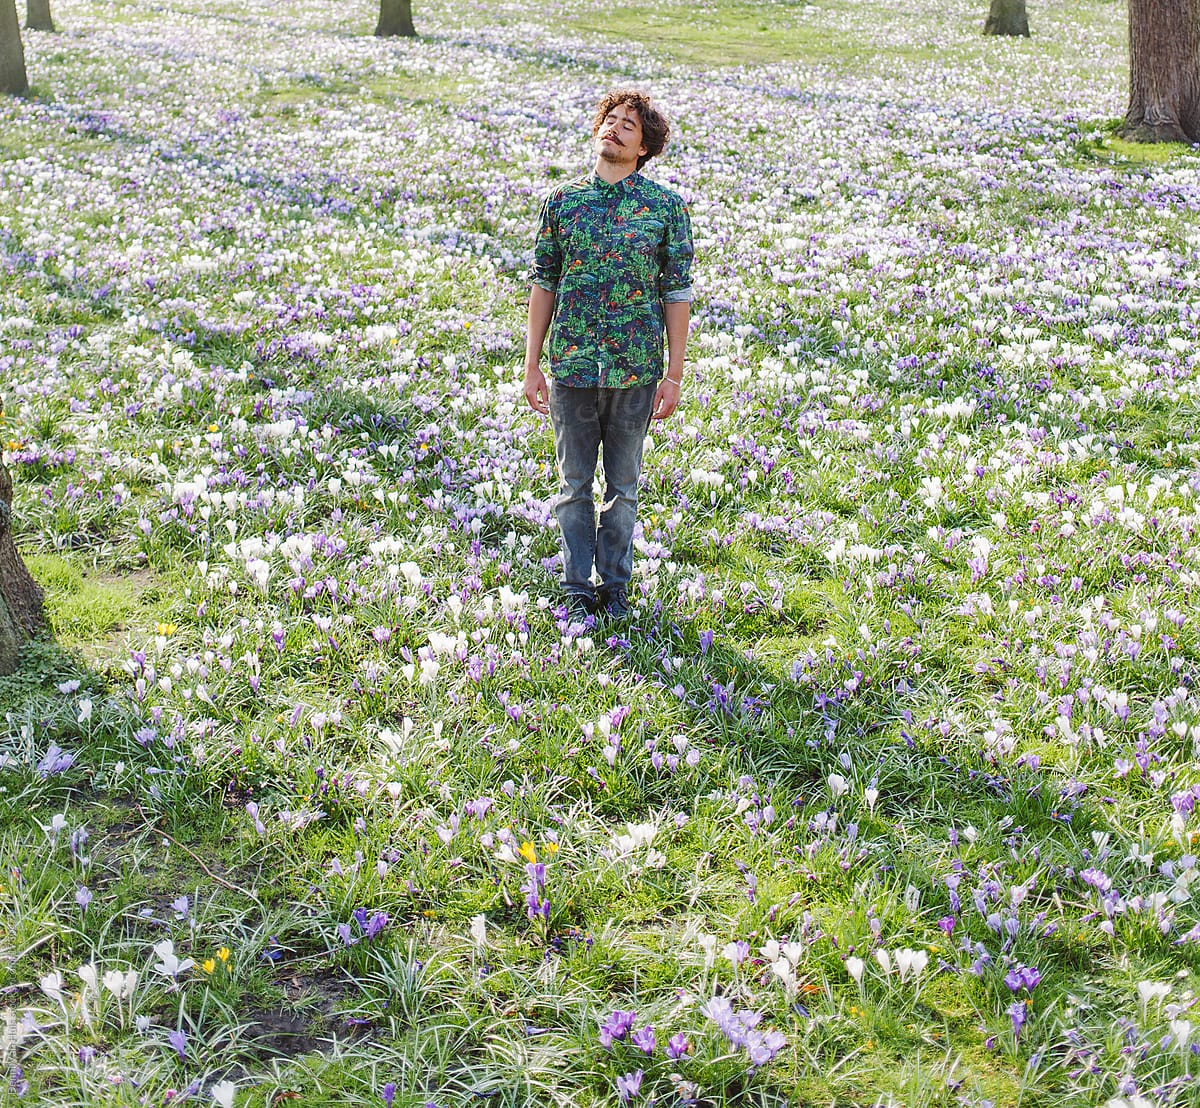 Young stylish man standing in a grass field of flowers with a flower shirt on.